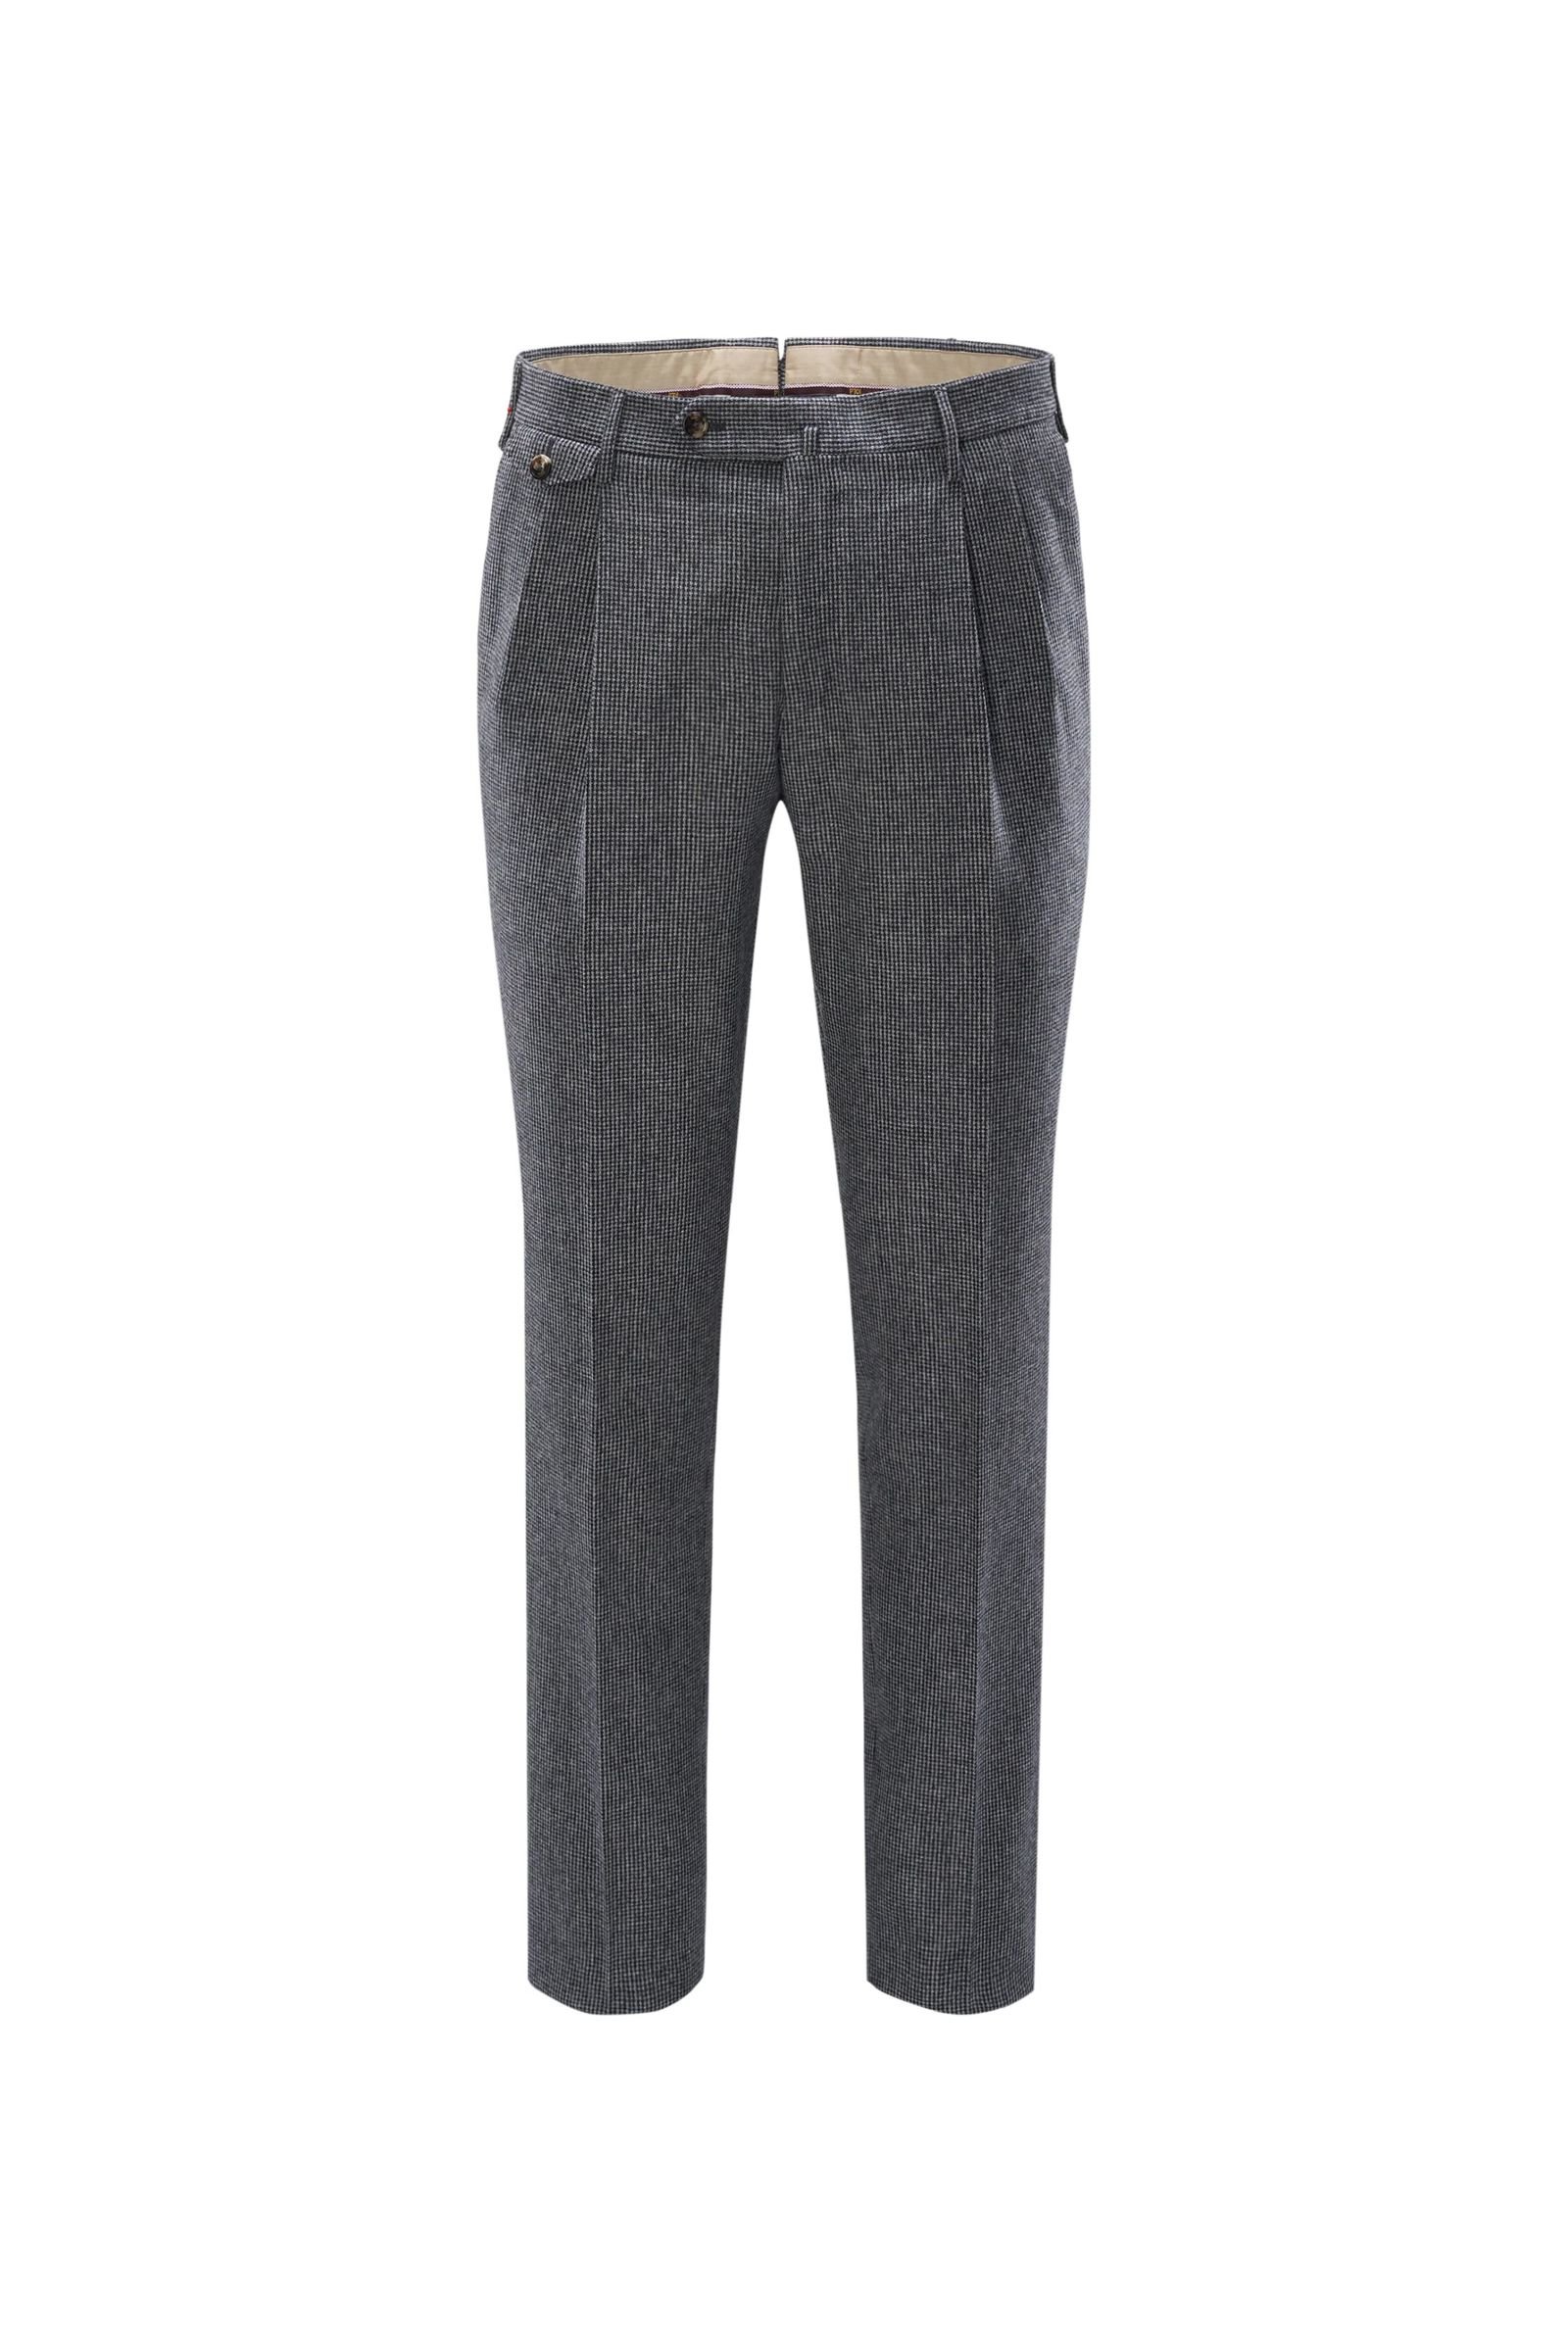 Wool trousers 'The Draper Gentleman Fit' grey/black checked